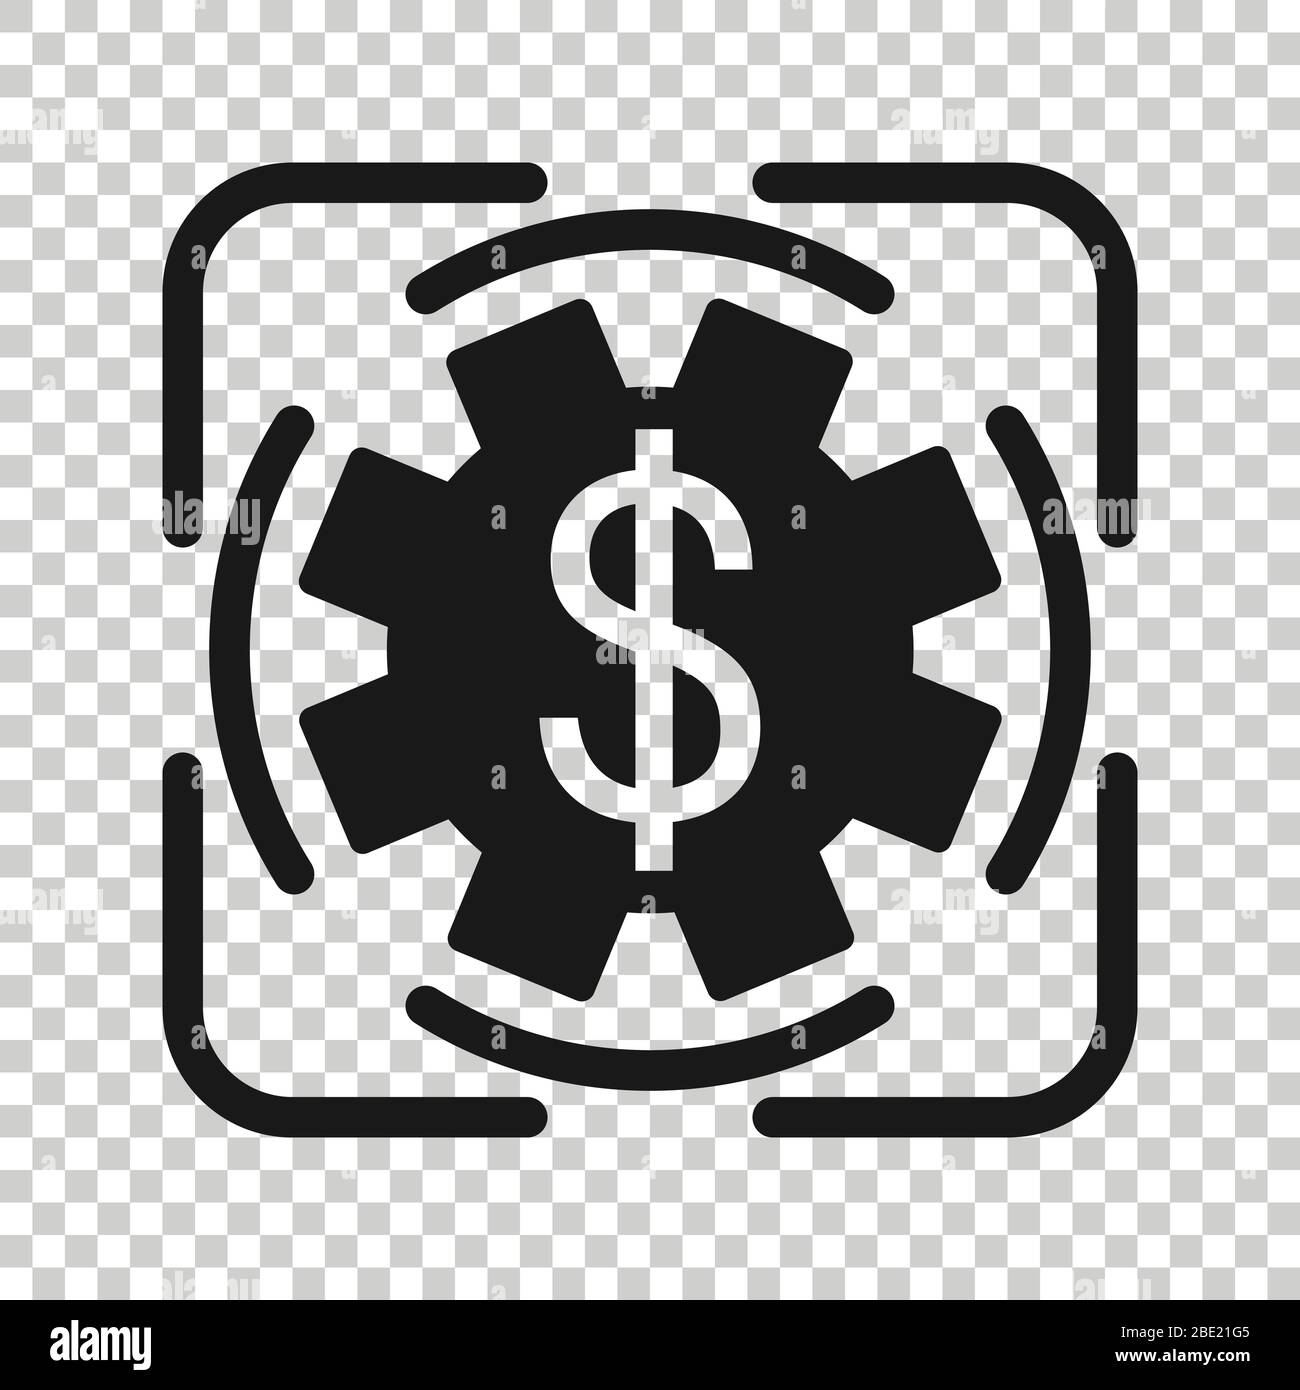 Money revenue icon in flat style. Dollar coin vector illustration on white isolated background. Finance structure business concept. Stock Vector